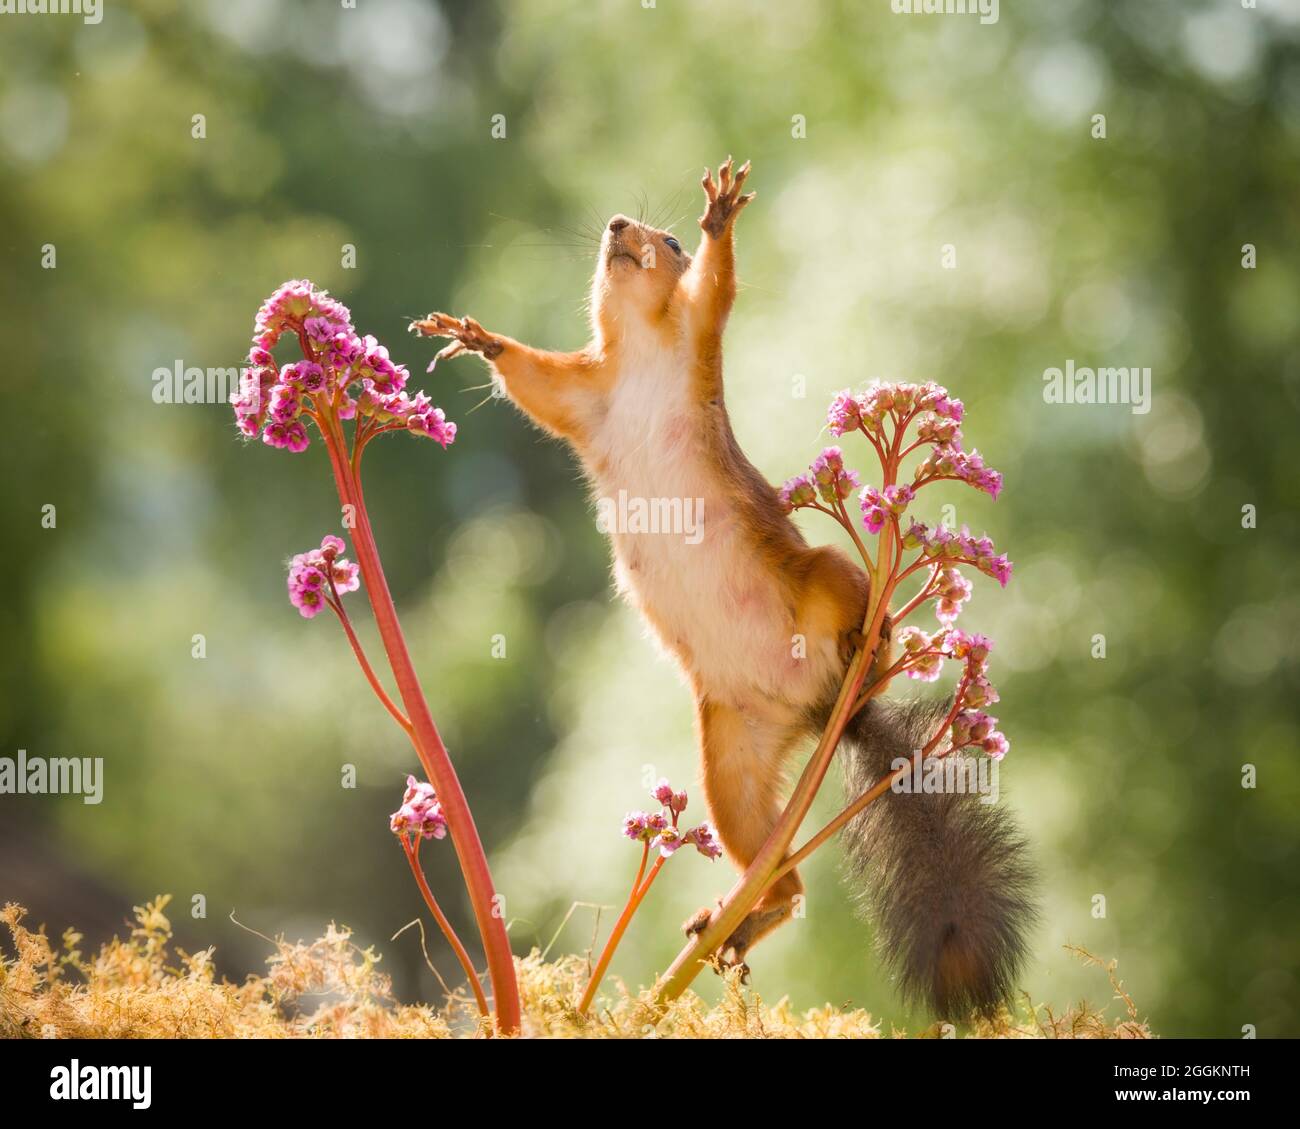 red squirrel reaching out between Bergenia Stock Photo